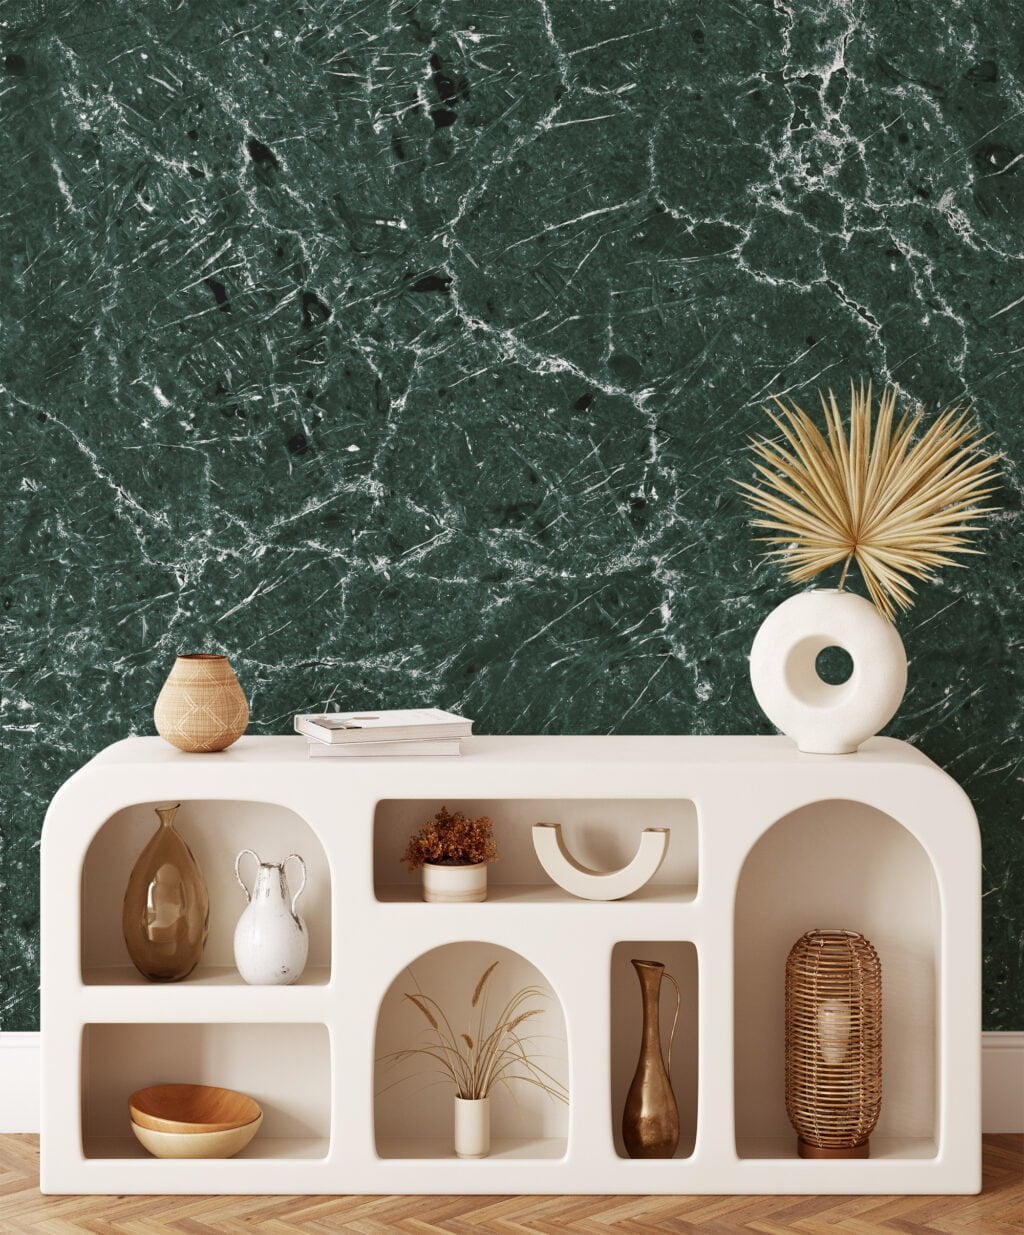 Elevate Your Space with Dark Green Stone Marble Texture Wallpaper, a Removable Wall Mural That Captures the Essence of Luxury and Sophistication